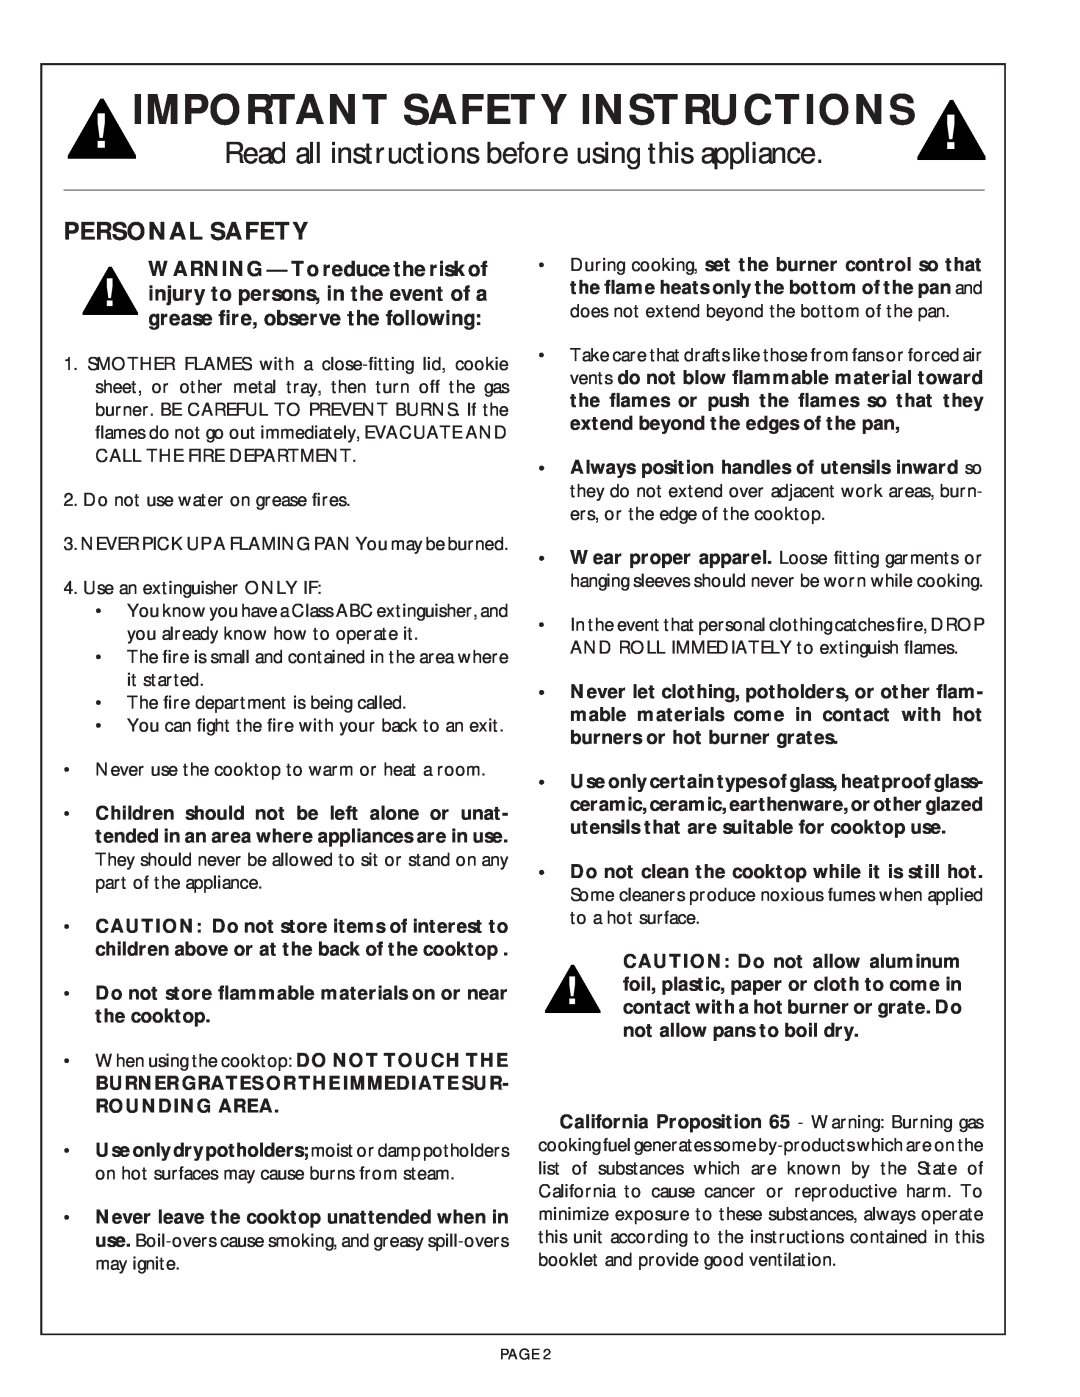 Thermador SGCS456, SGC456 owner manual Personal Safety, WARNING - To reduce the risk of, Important Safety Instructions 